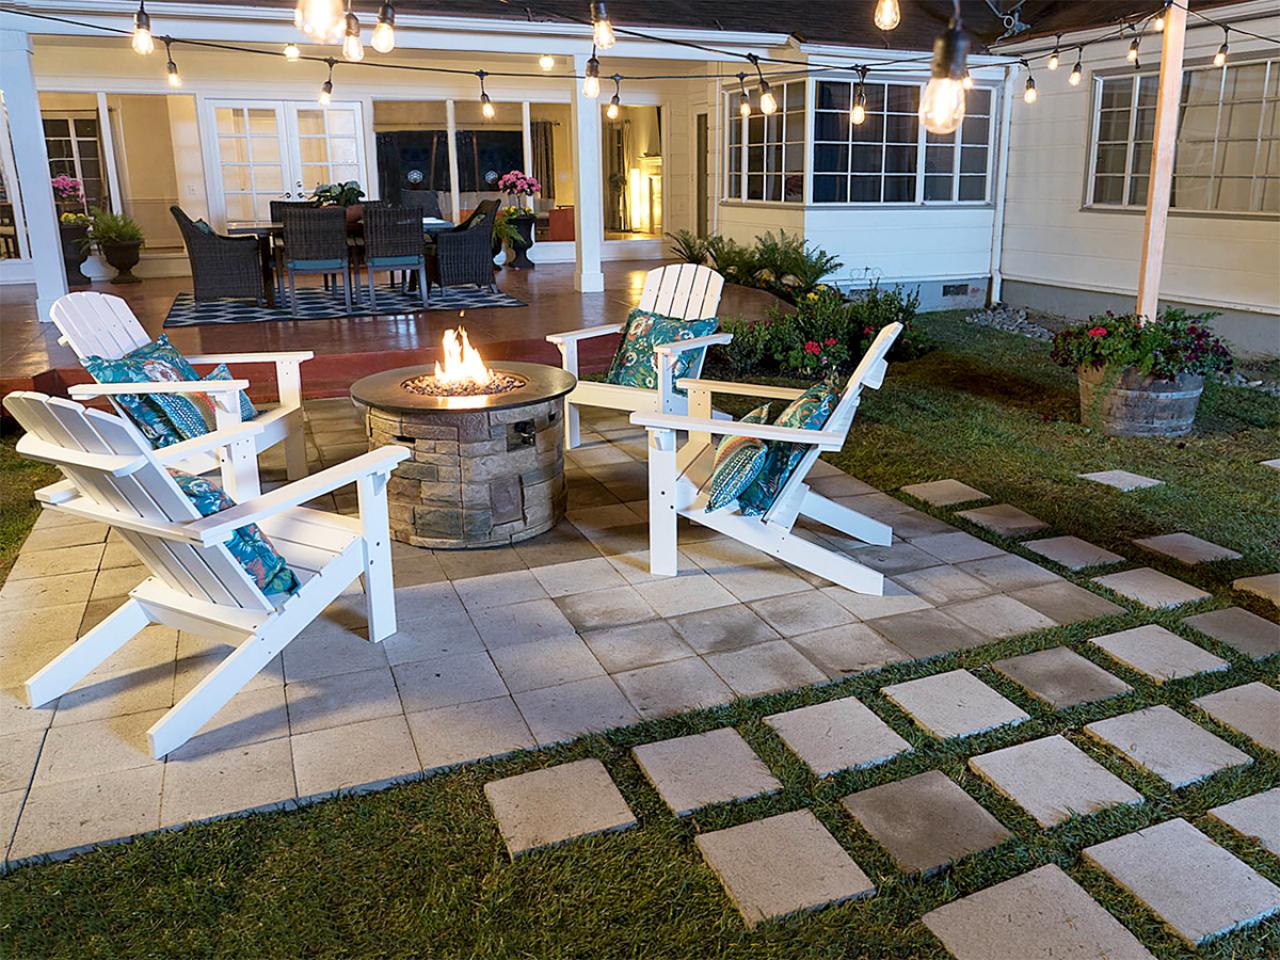 How To Lay A Paver Patio For Firepit, How To Build A Fire Pit With Pavers